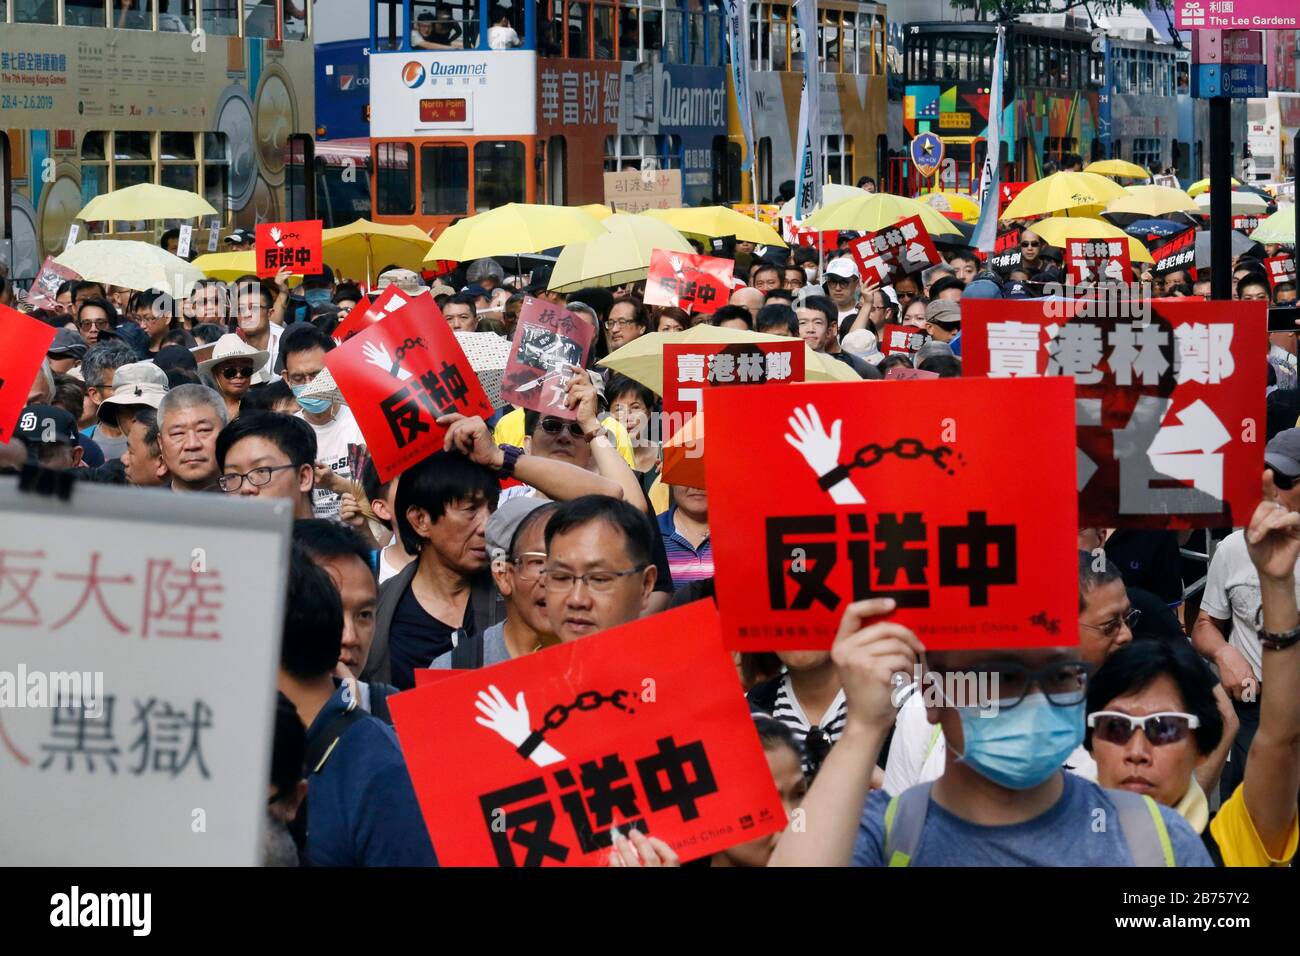 Pro-democracy Hong Kongers take part in a march against a proposed extradition law in Hong Kong, China, 28 April 2019. Earlier in April the Hong Kong government introduced an amendment bill which would allow the transfer of fugitives, on a case-by-case basis, to any jurisdiction with which Hong Kong did not have an agreement, including mainland China, Macau and Taiwan. Stock Photo